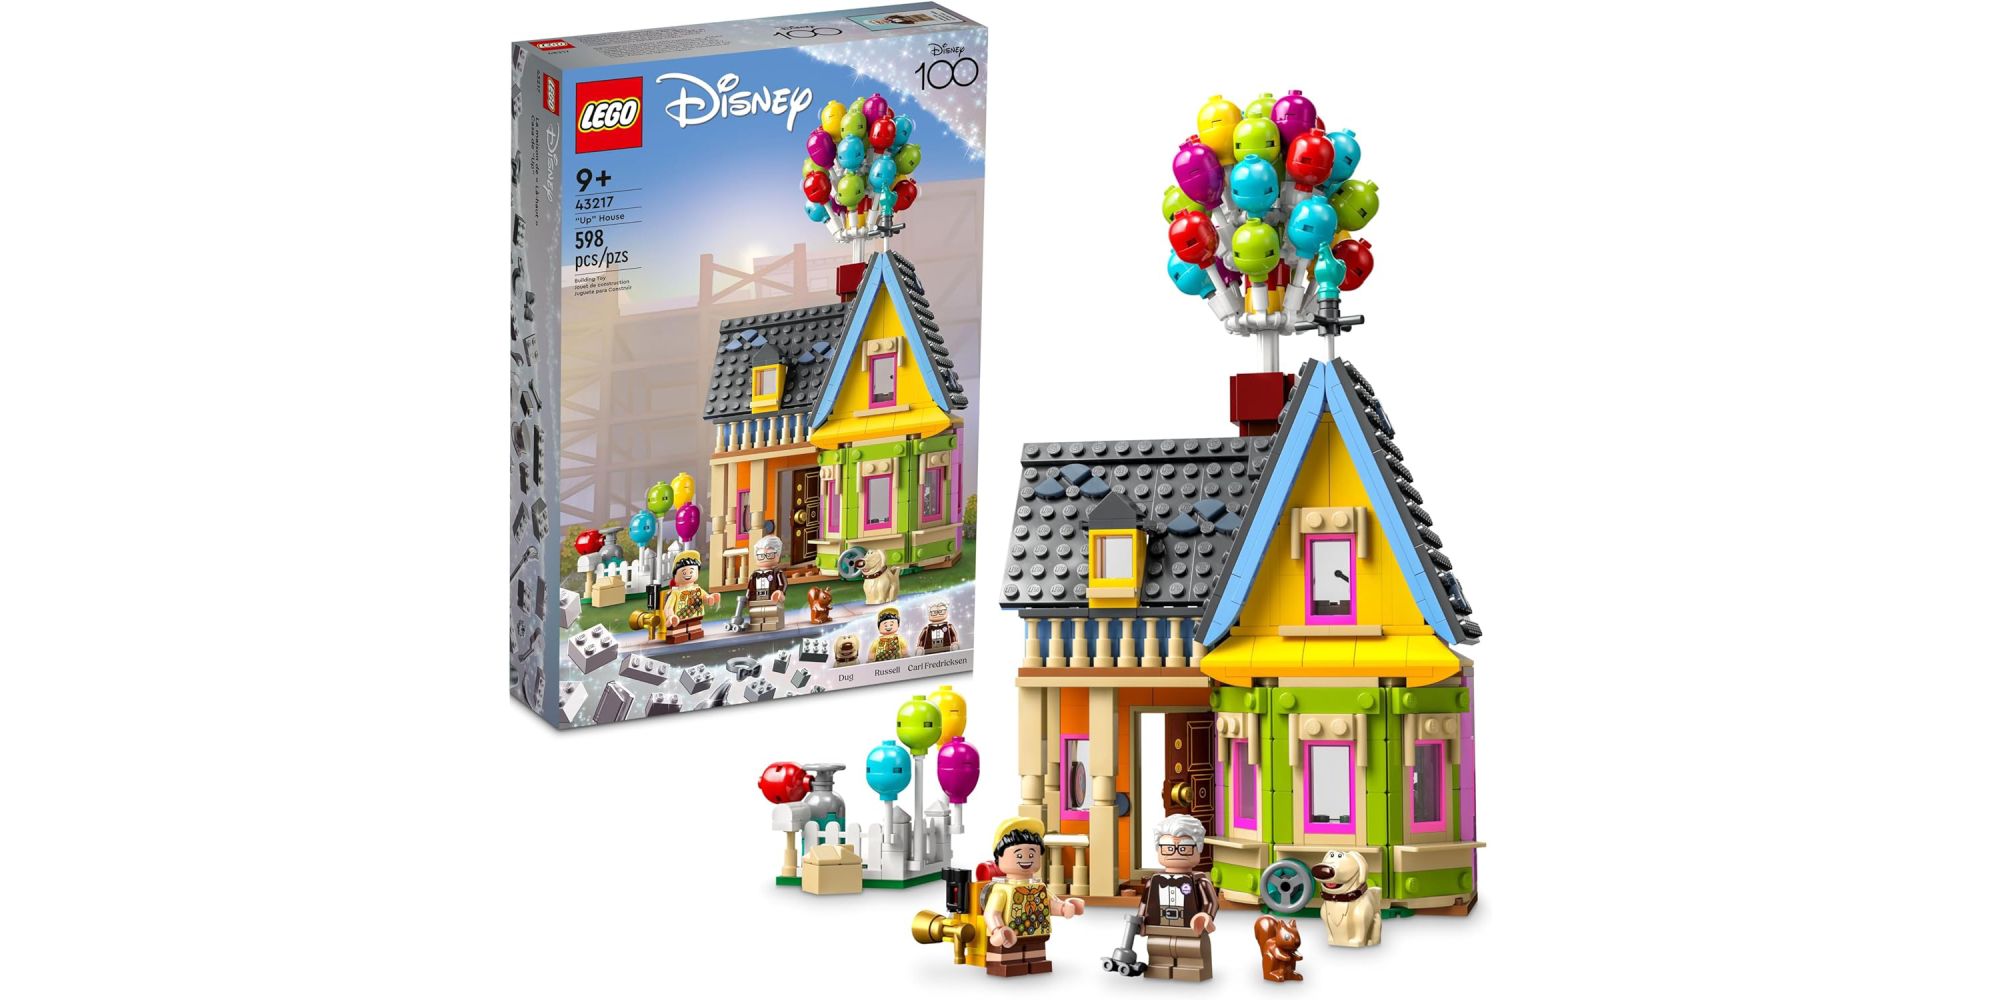 LEGO Disney Pixar Up House with minifigs of Carl, Russell, and Dug